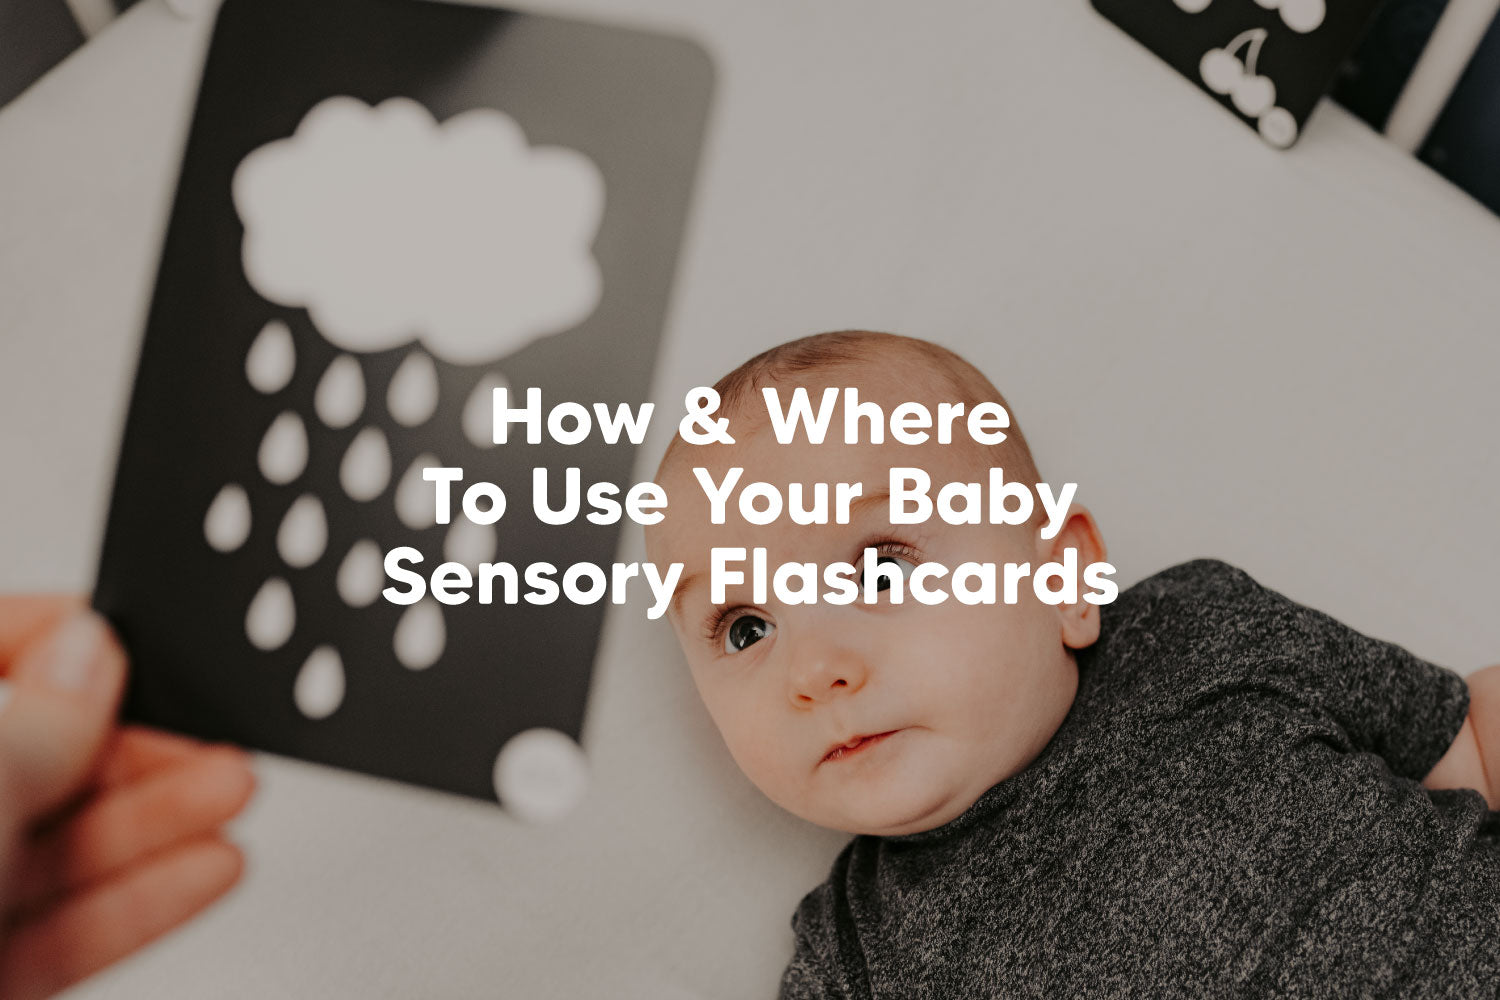 Flashcards for Babies